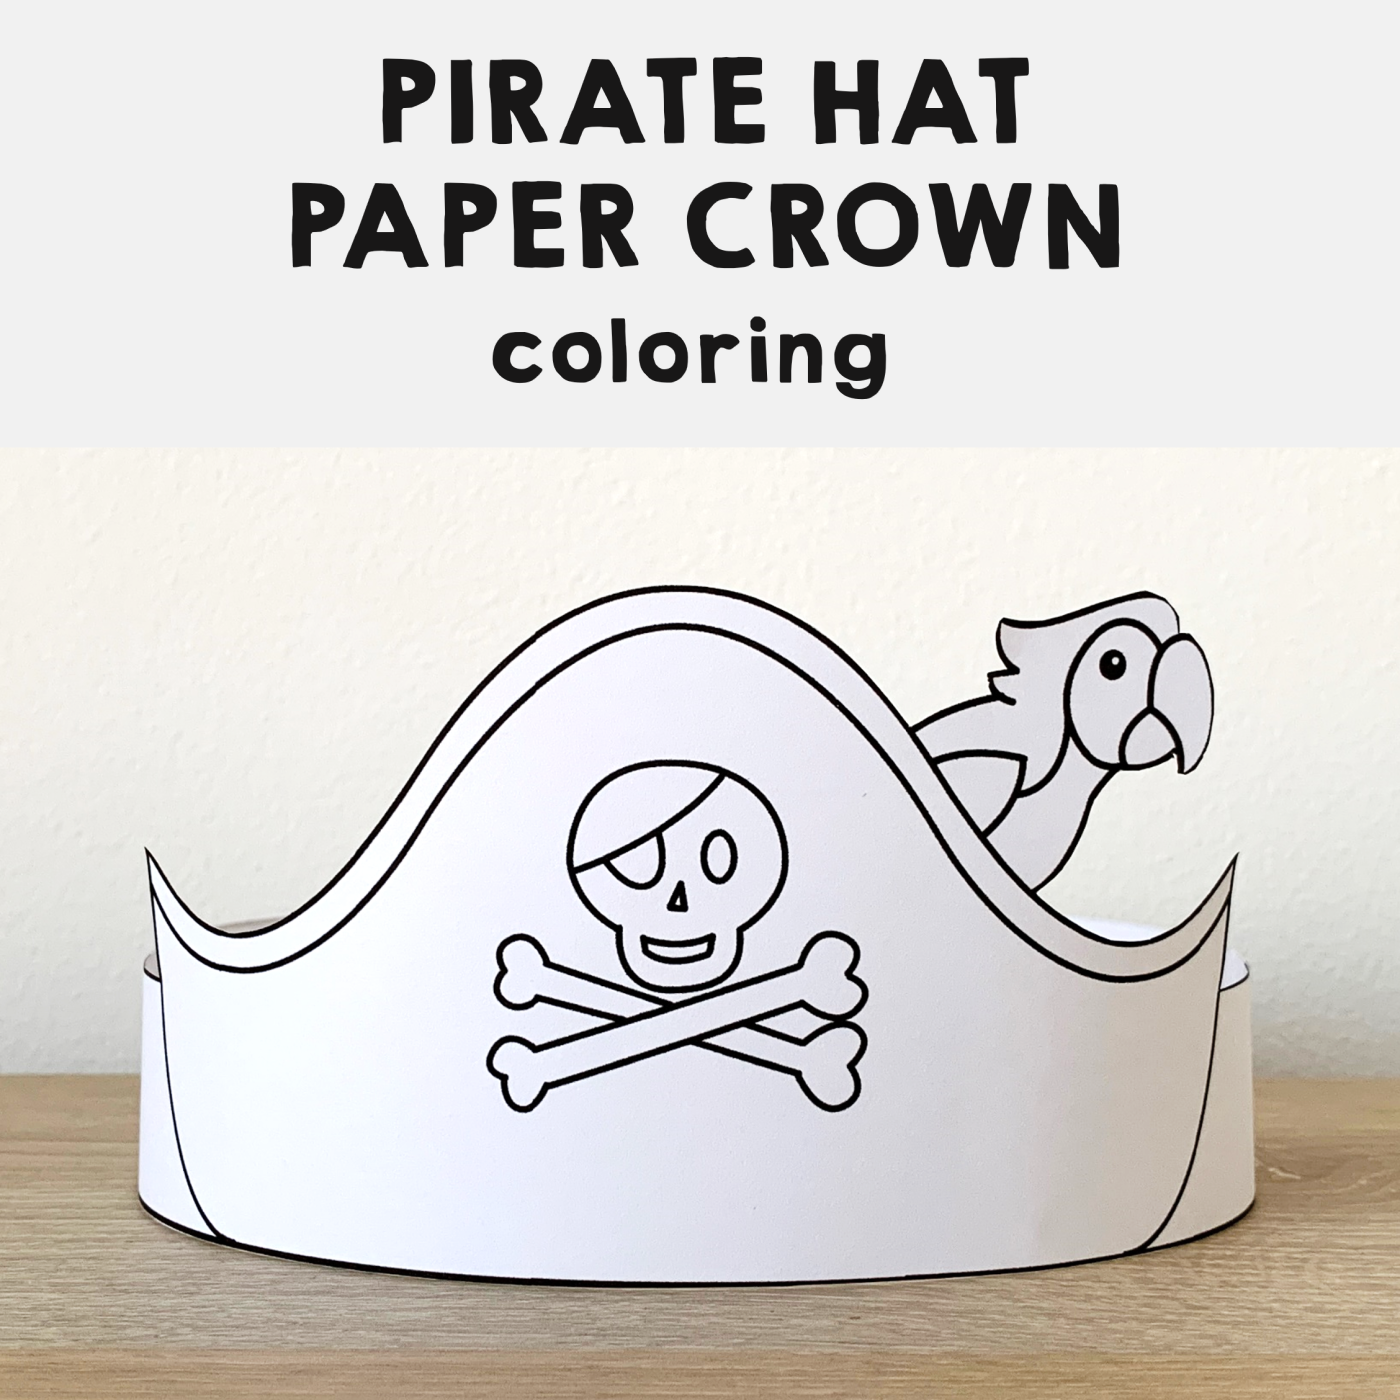 Pirate hat paper crown coloring craft skull parrot made by teachers